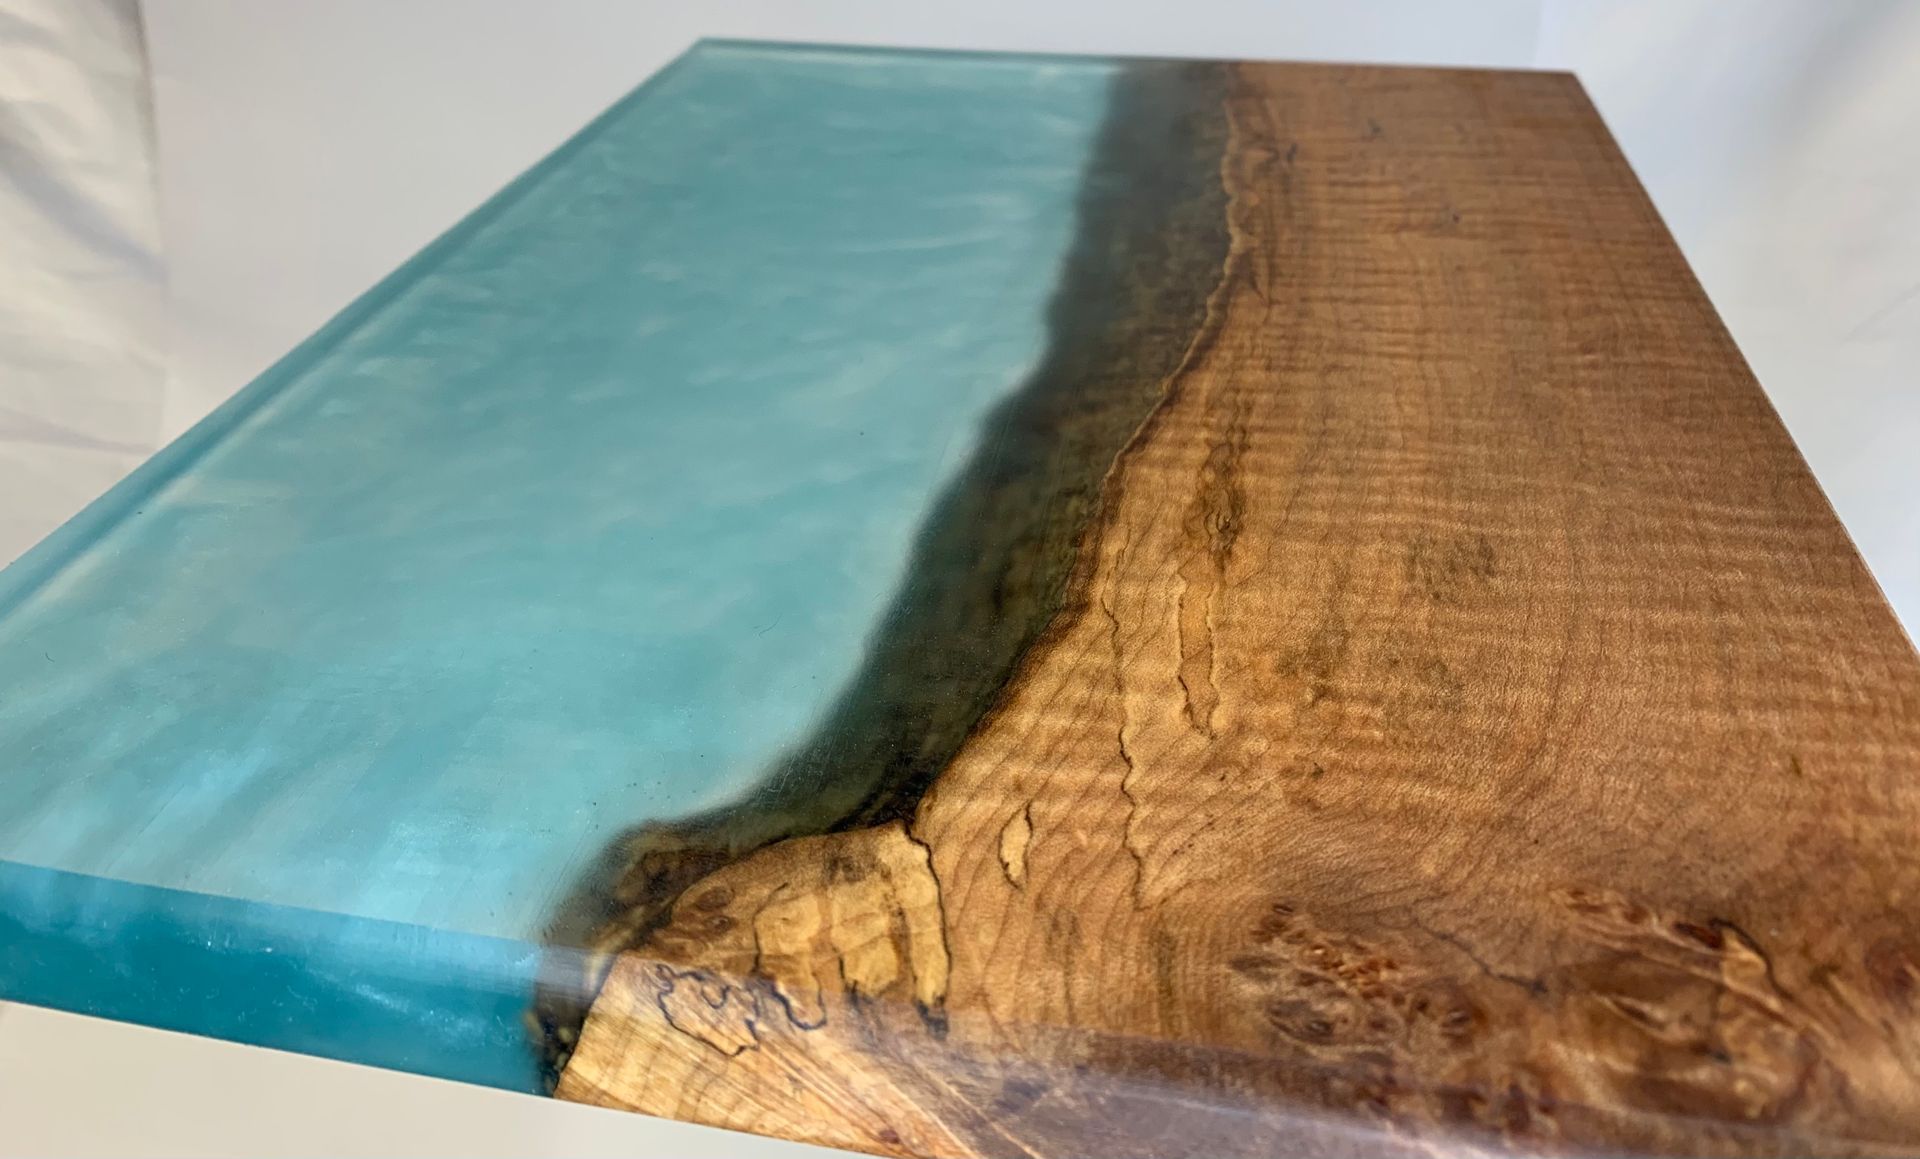 A piece of wood with a blue resin coating on it.